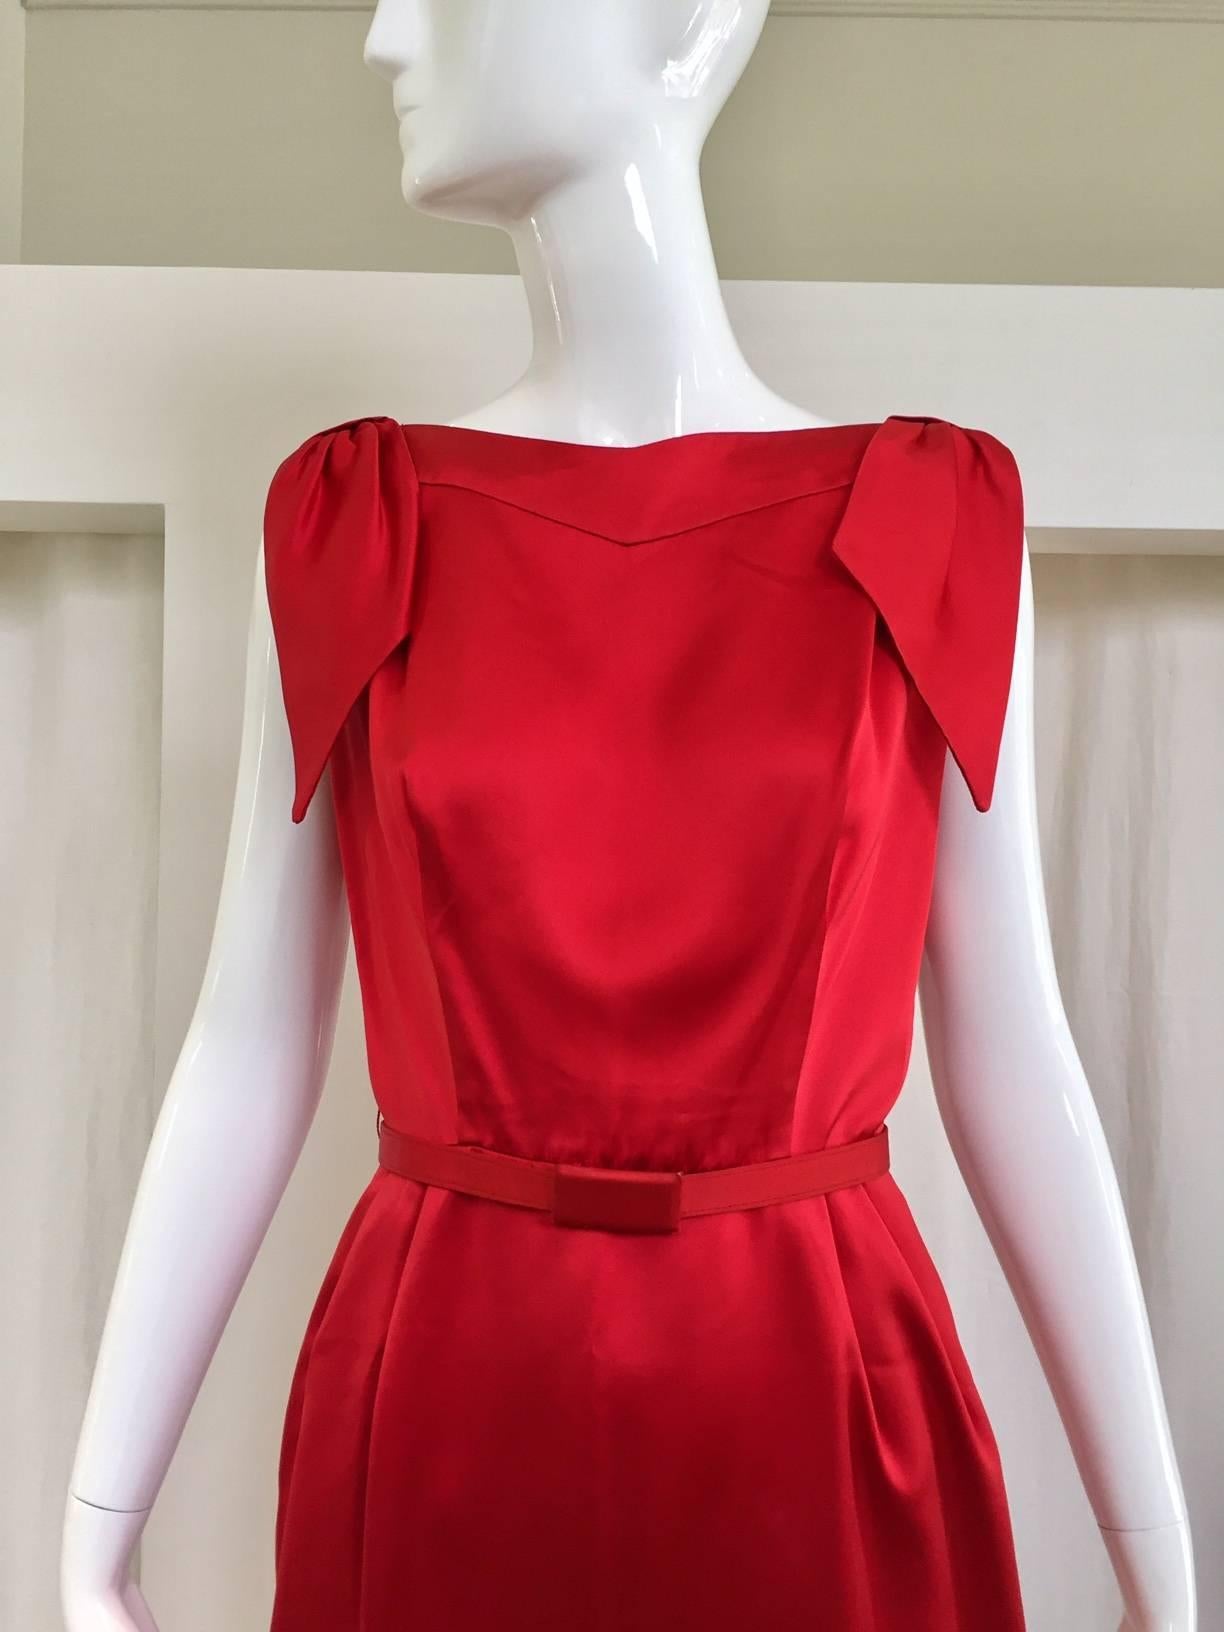 Sexy and timeless early 1960s sheath Cocktail dress by Don Loper.  Satin belt. Bows on shoulder. Classic Audrey Hepburn style. 
Bust: 36